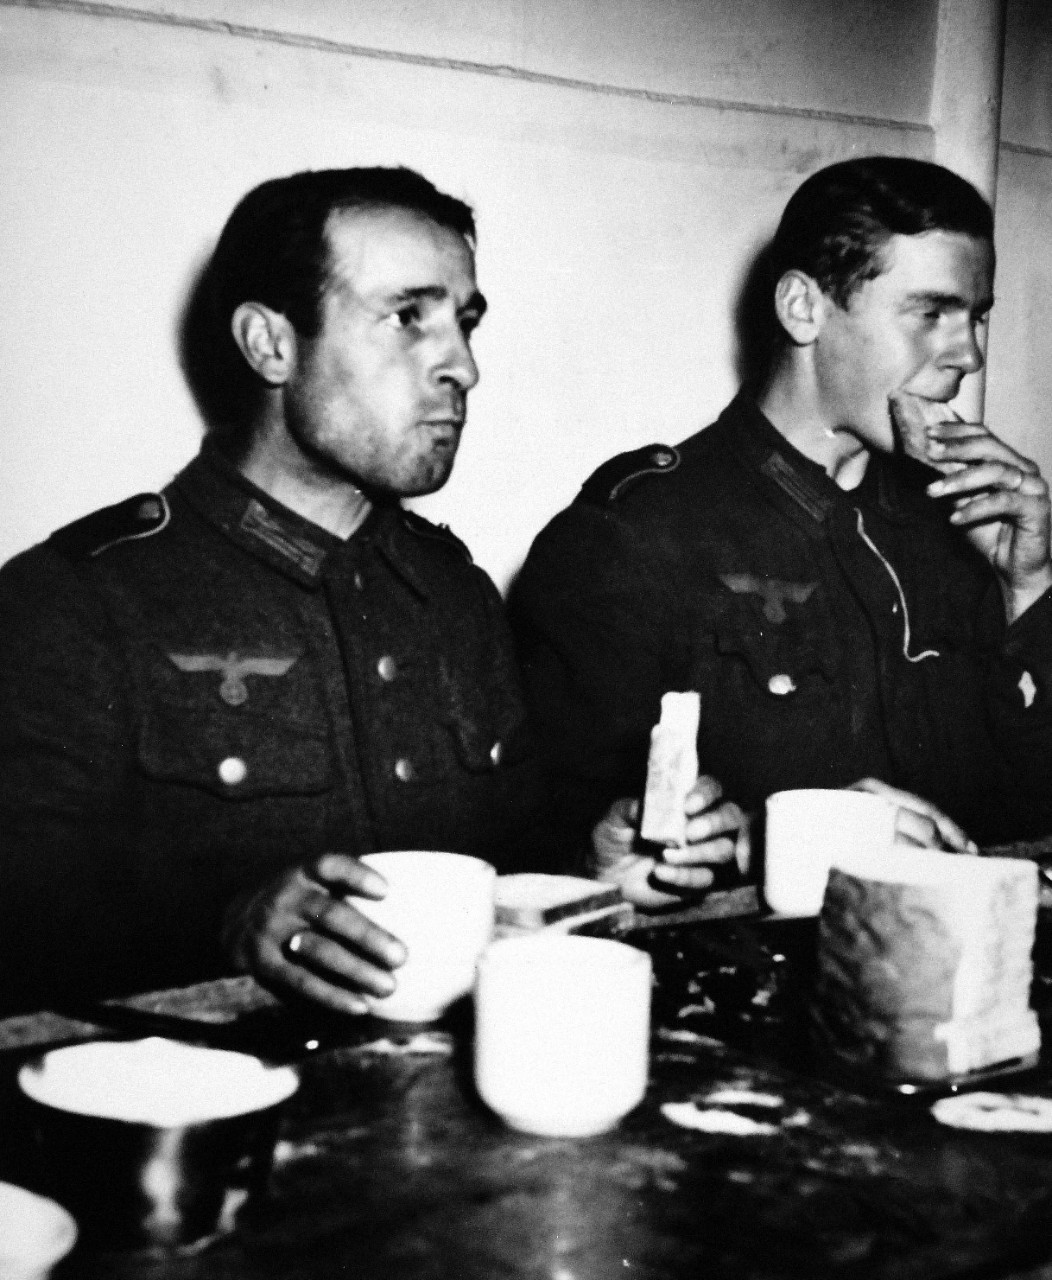 26-G-2432:  Normandy Invasion, German Prisoners, June 1944.  The Awakening.  On Board a U.S. Coast manned troop transport headed for the United States, two Nazi prisoners present a picture of downcast disillusion as they hungrily munch the first white bread they have tasted in many months.  Captured in the irresistible Yankee push from the Normandy beaches toward Cherbourg, these ex-supermen have been rudely awakened from mad Hitlerite dreams of world conquest.  The first shipment of hundreds of Nazis captured in France has just arrived at an Atlantic port, June 1944. U.S. Coast Guard Photograph, now in the collections of the National Archives.  (11/18/2014).  